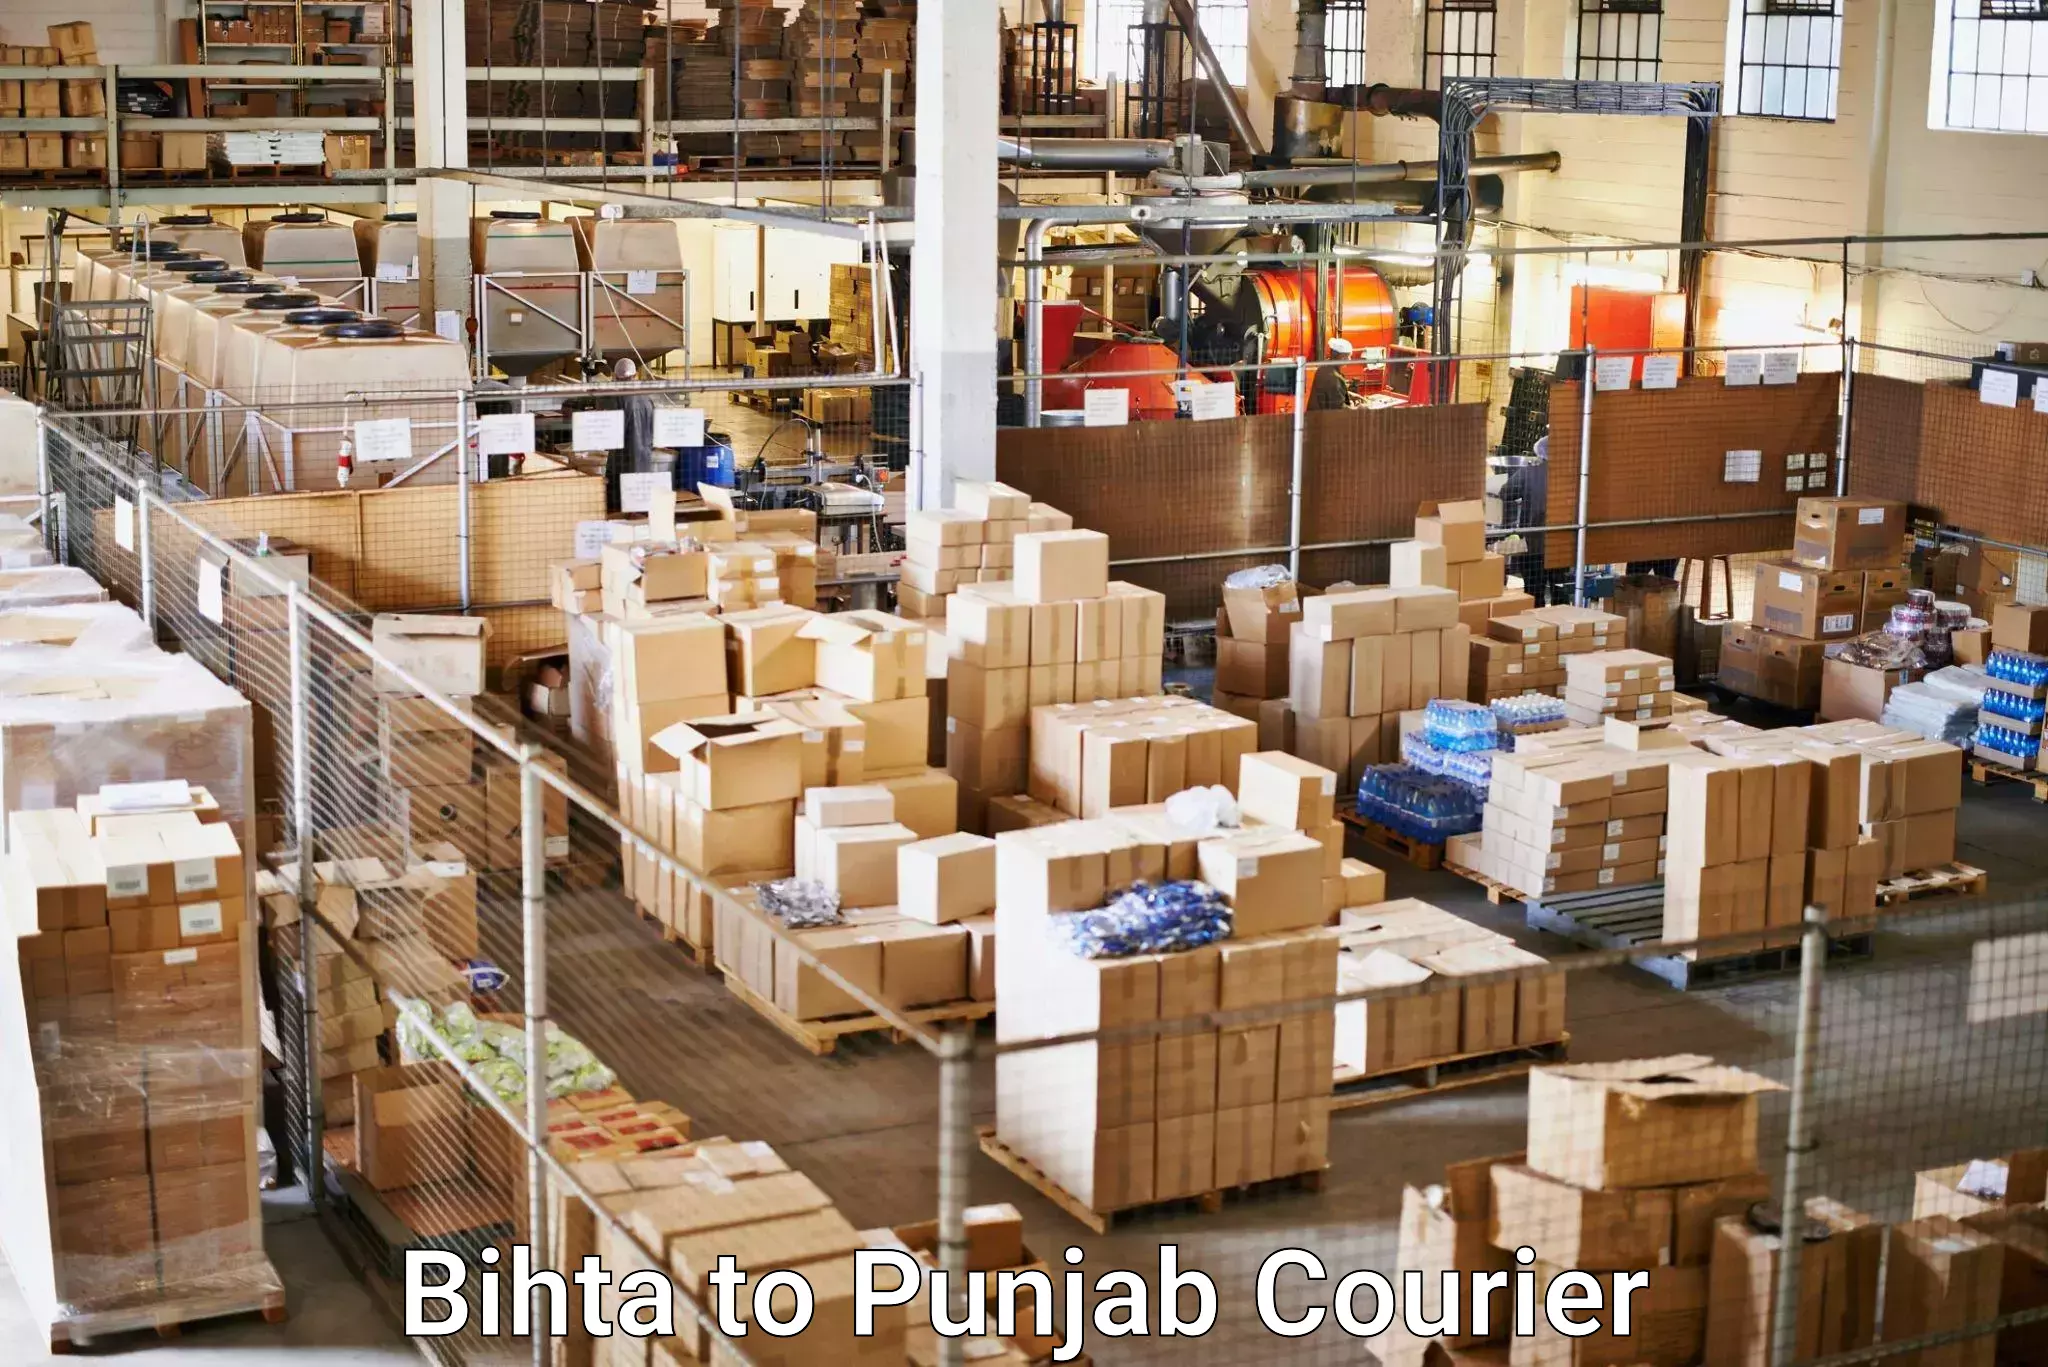 Express package transport in Bihta to Amritsar